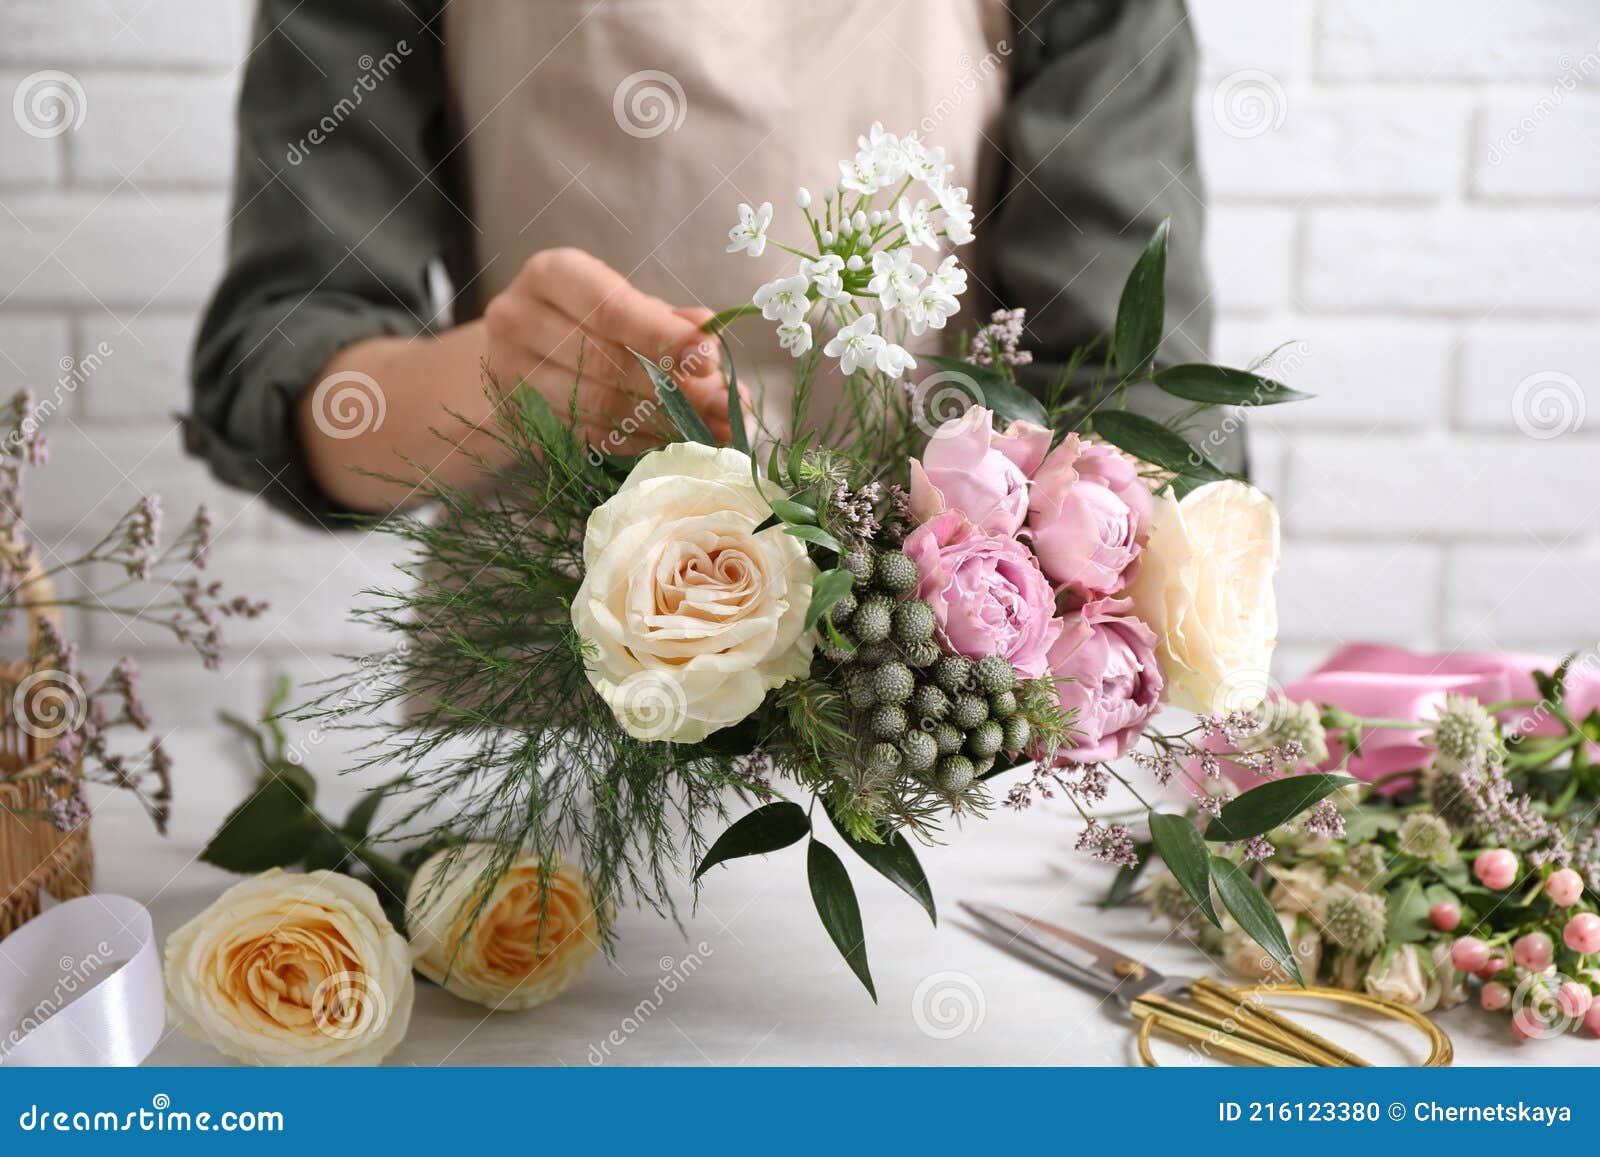 florist making beautiful bouquet at white table, closeup